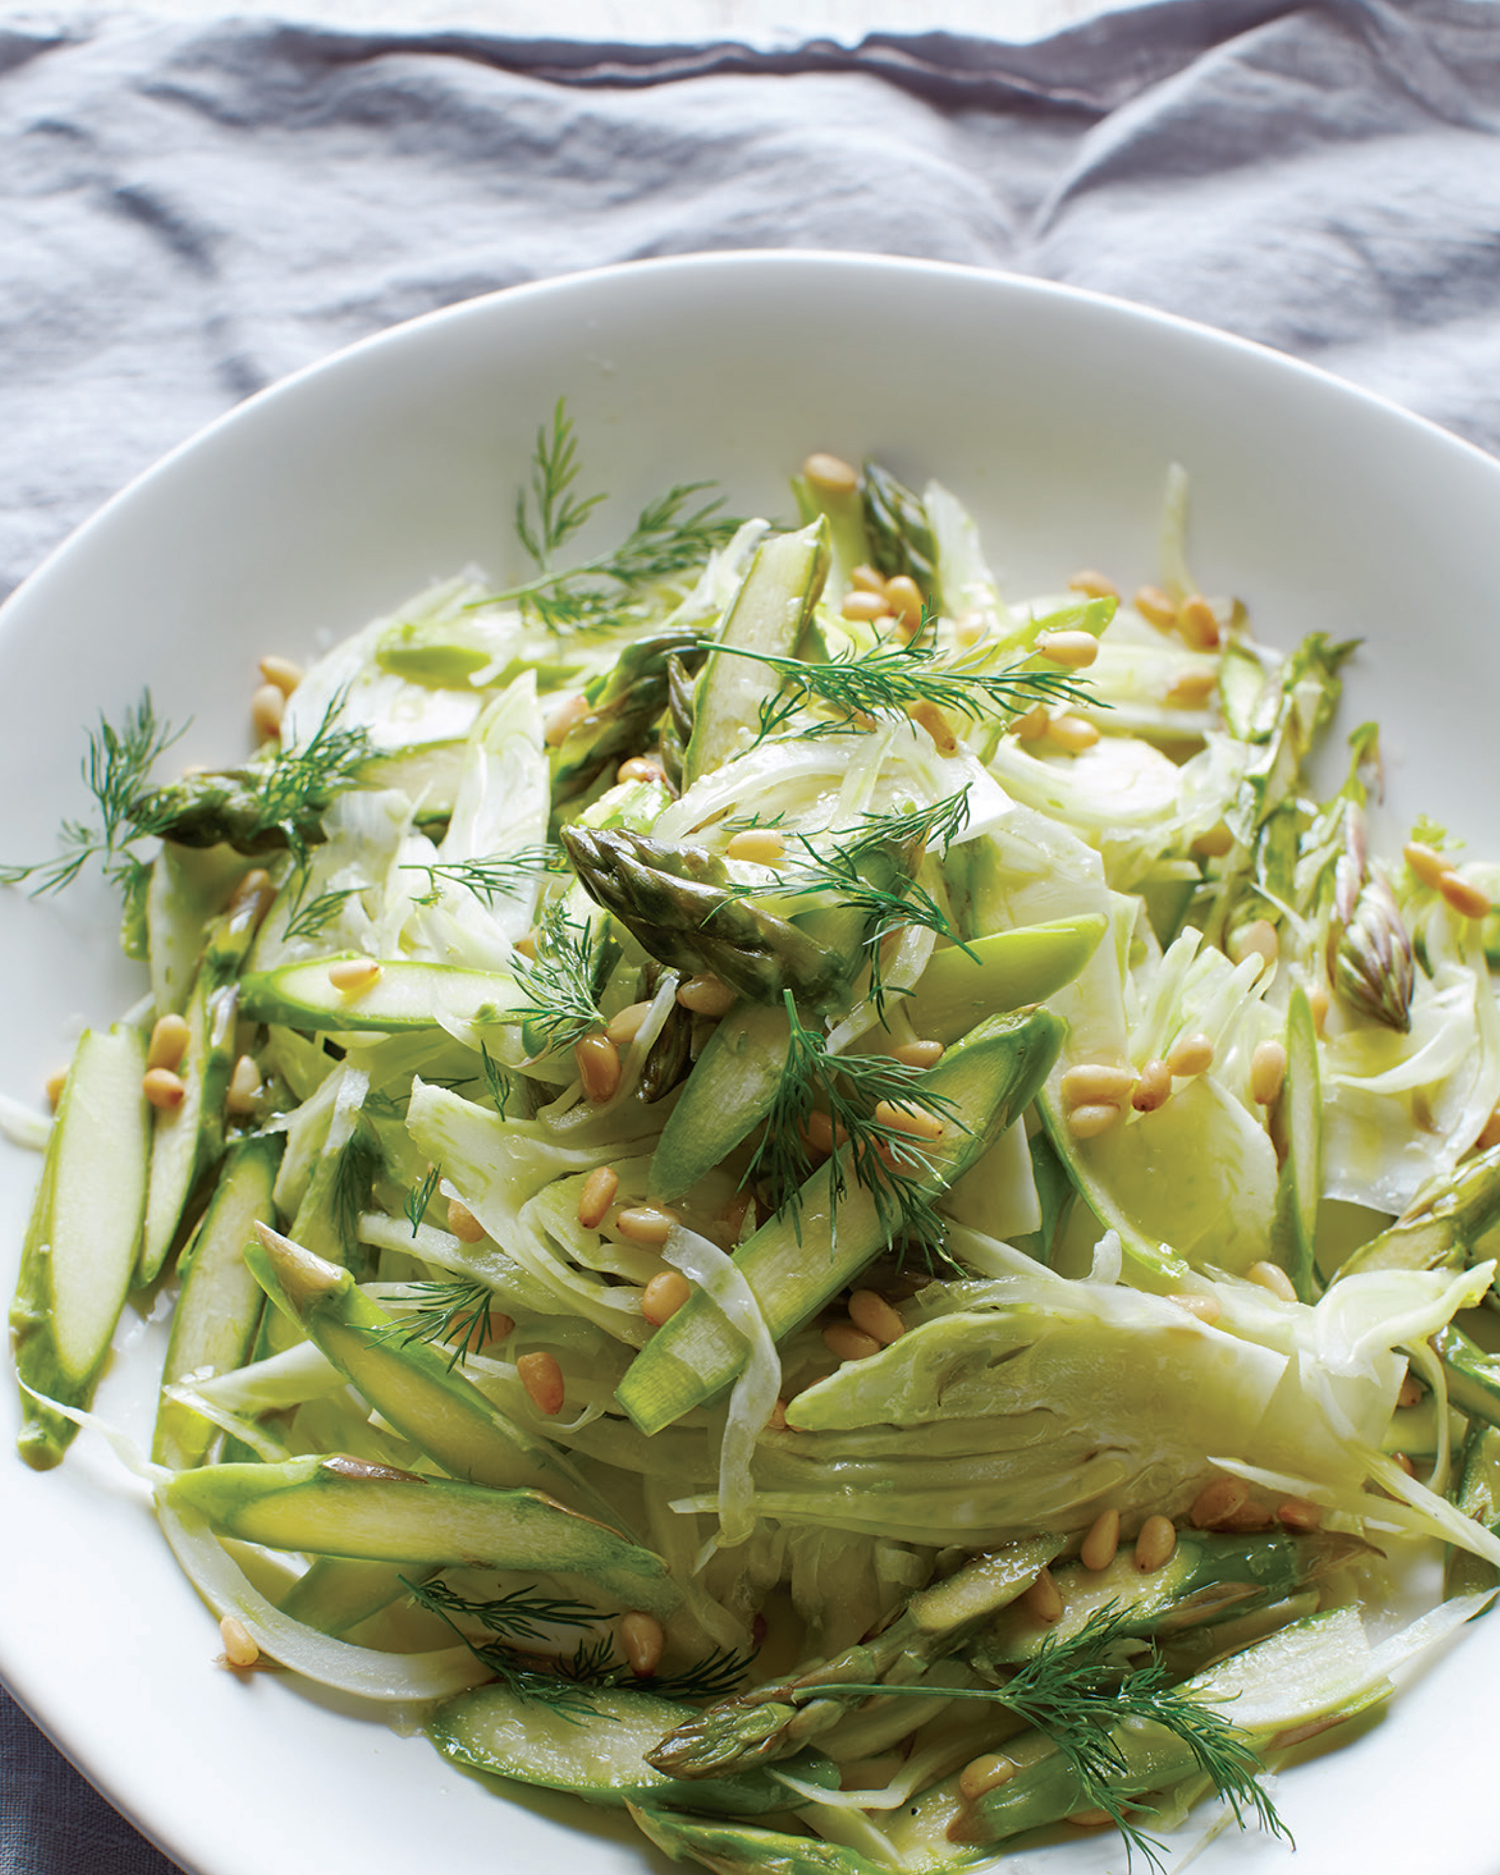 Fennel and Asparagus Ribbon Slaw Copyright 2016 by Independent Productions - photo 3